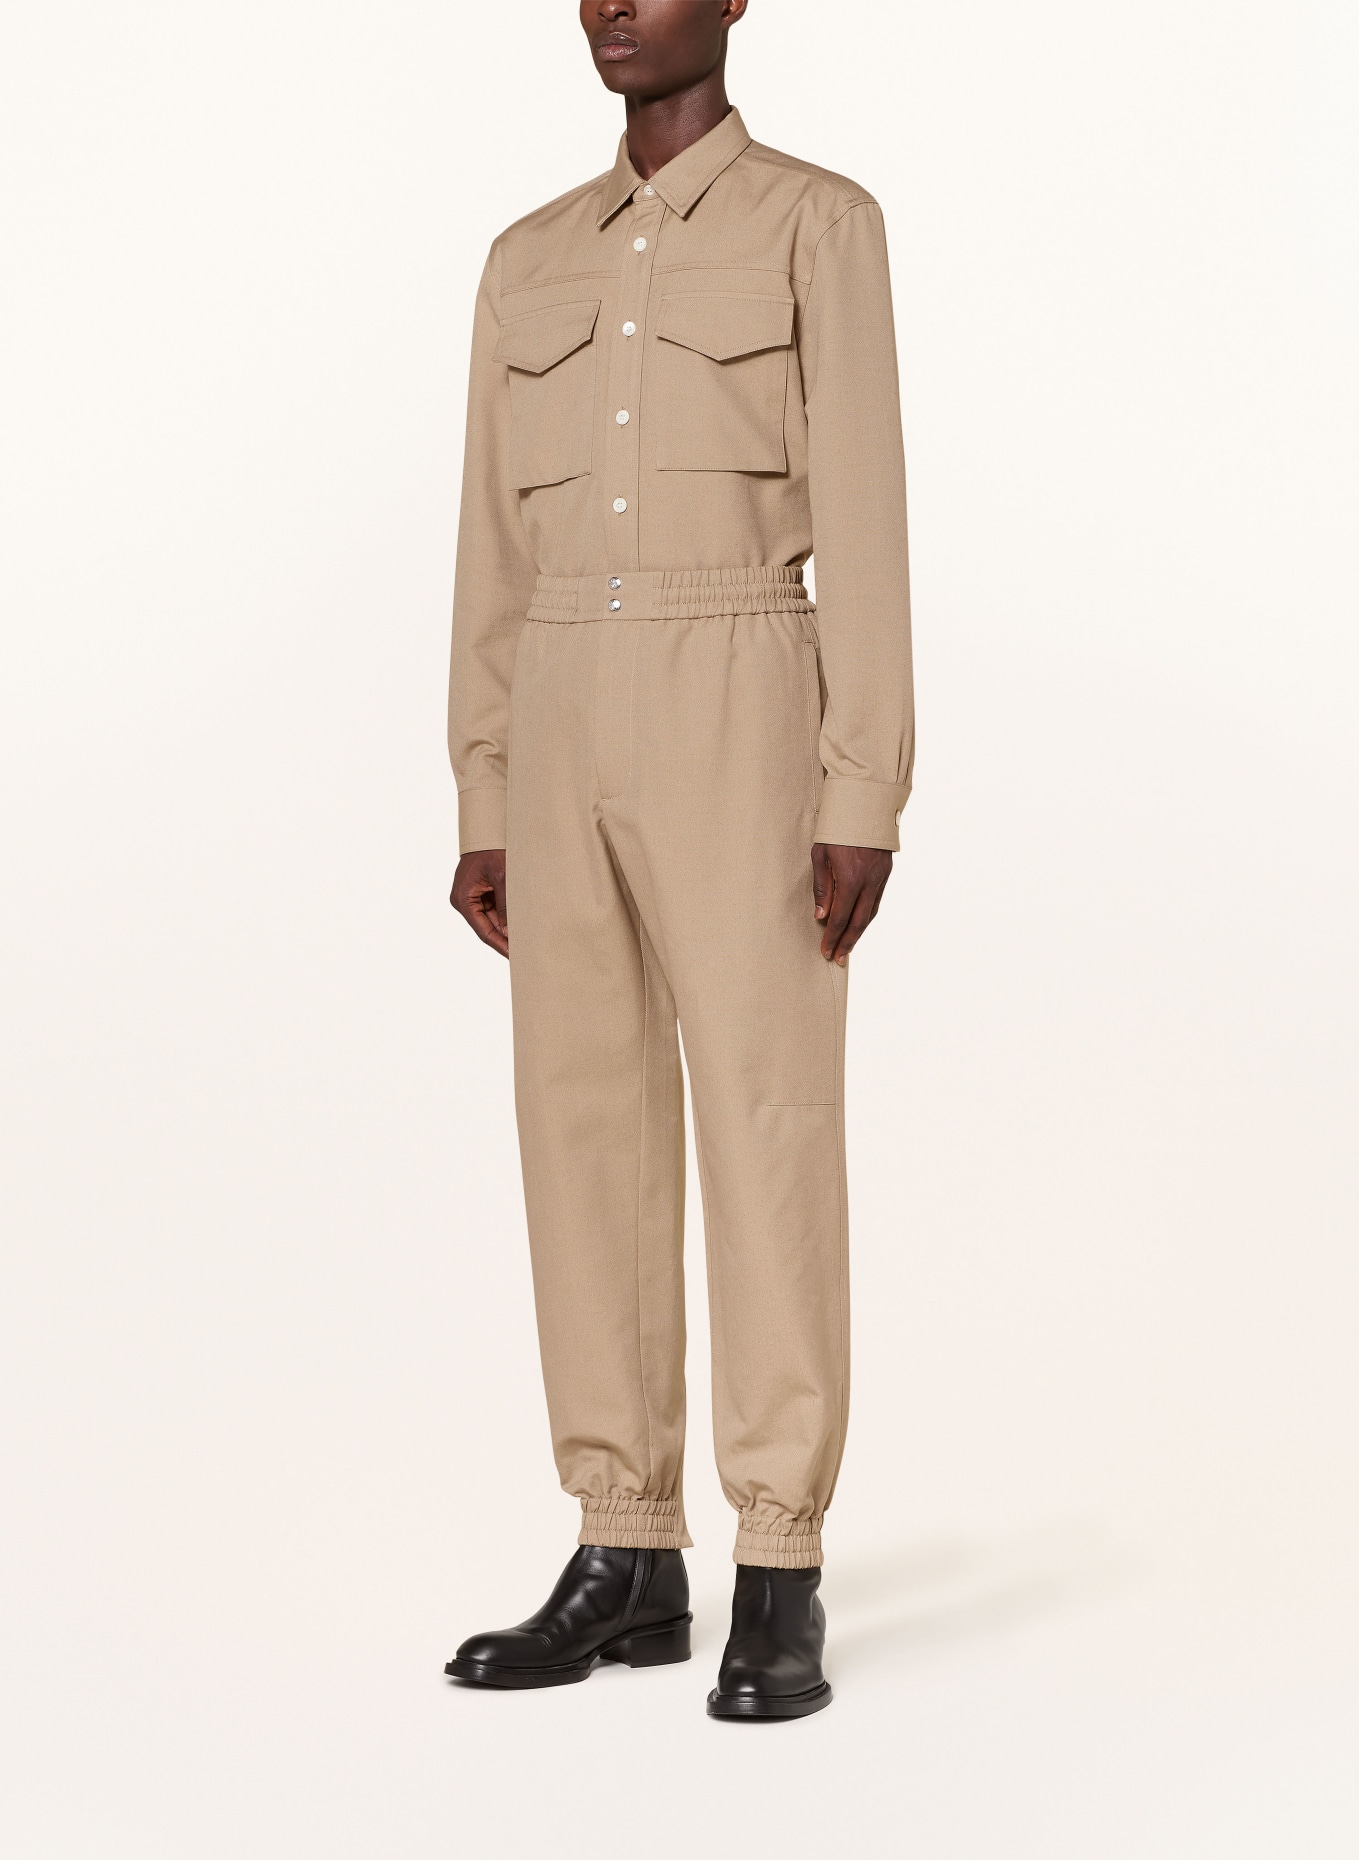 Alexander McQUEEN Pants in jogger style extra slim fit, Color: BEIGE (Image 2)